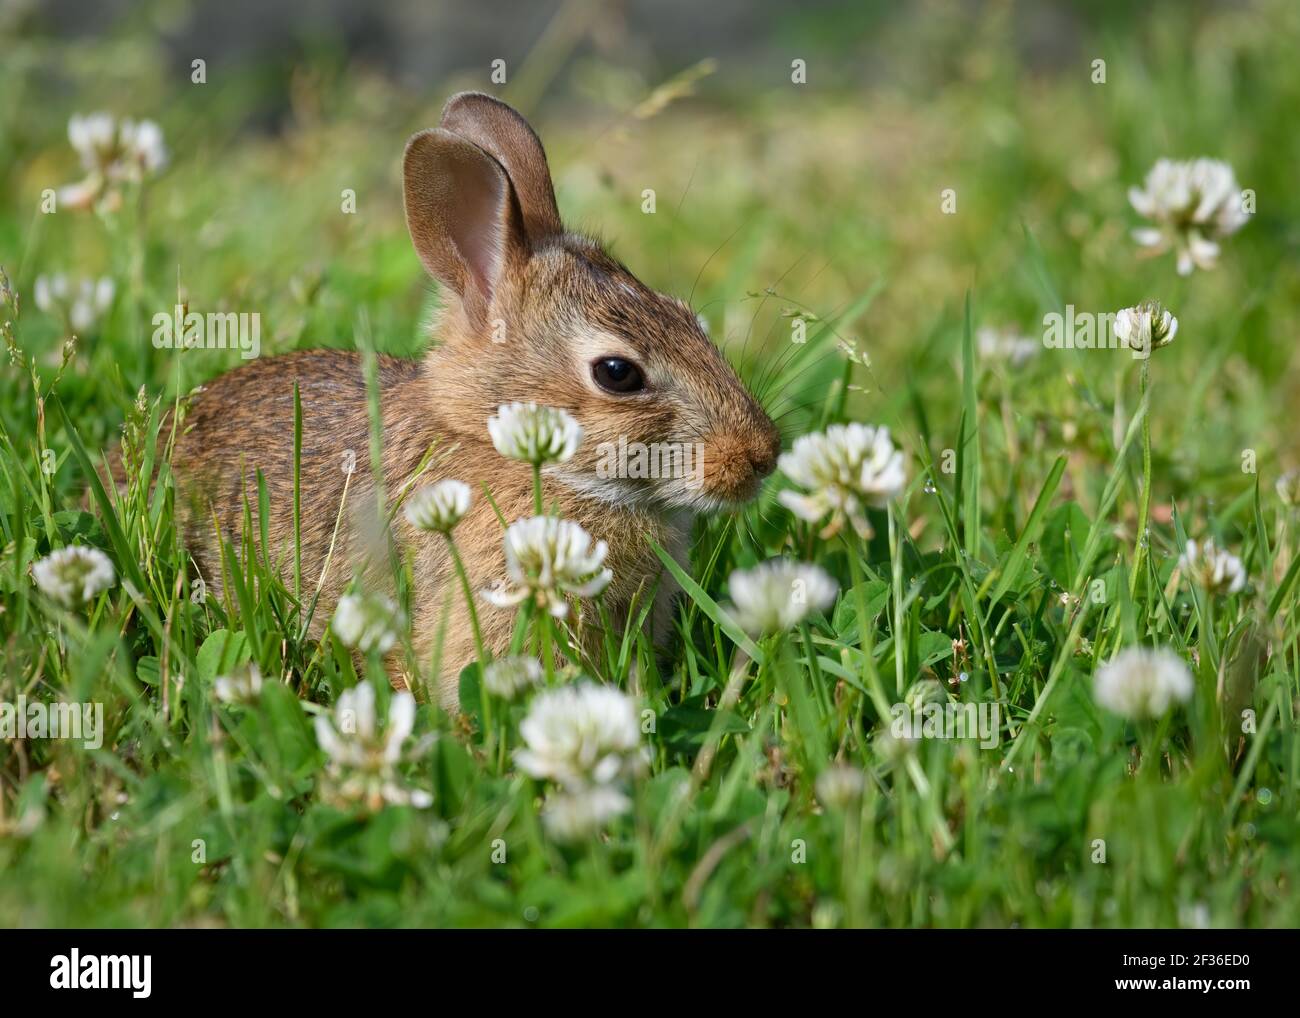 Young rabbit in a patch of clover Stock Photo